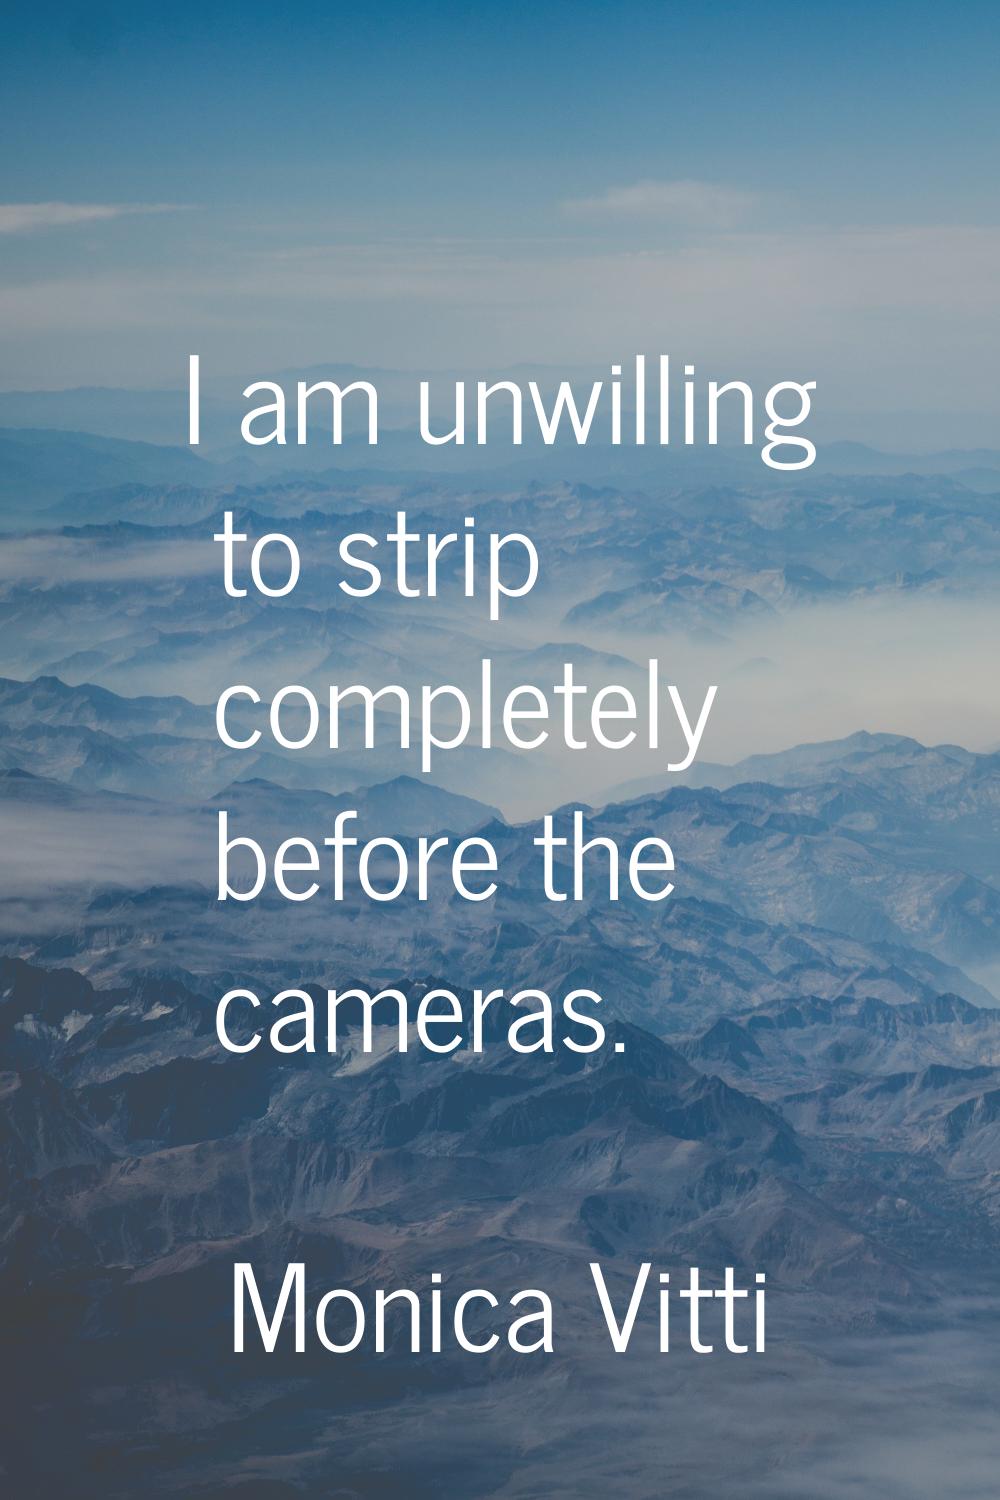 I am unwilling to strip completely before the cameras.